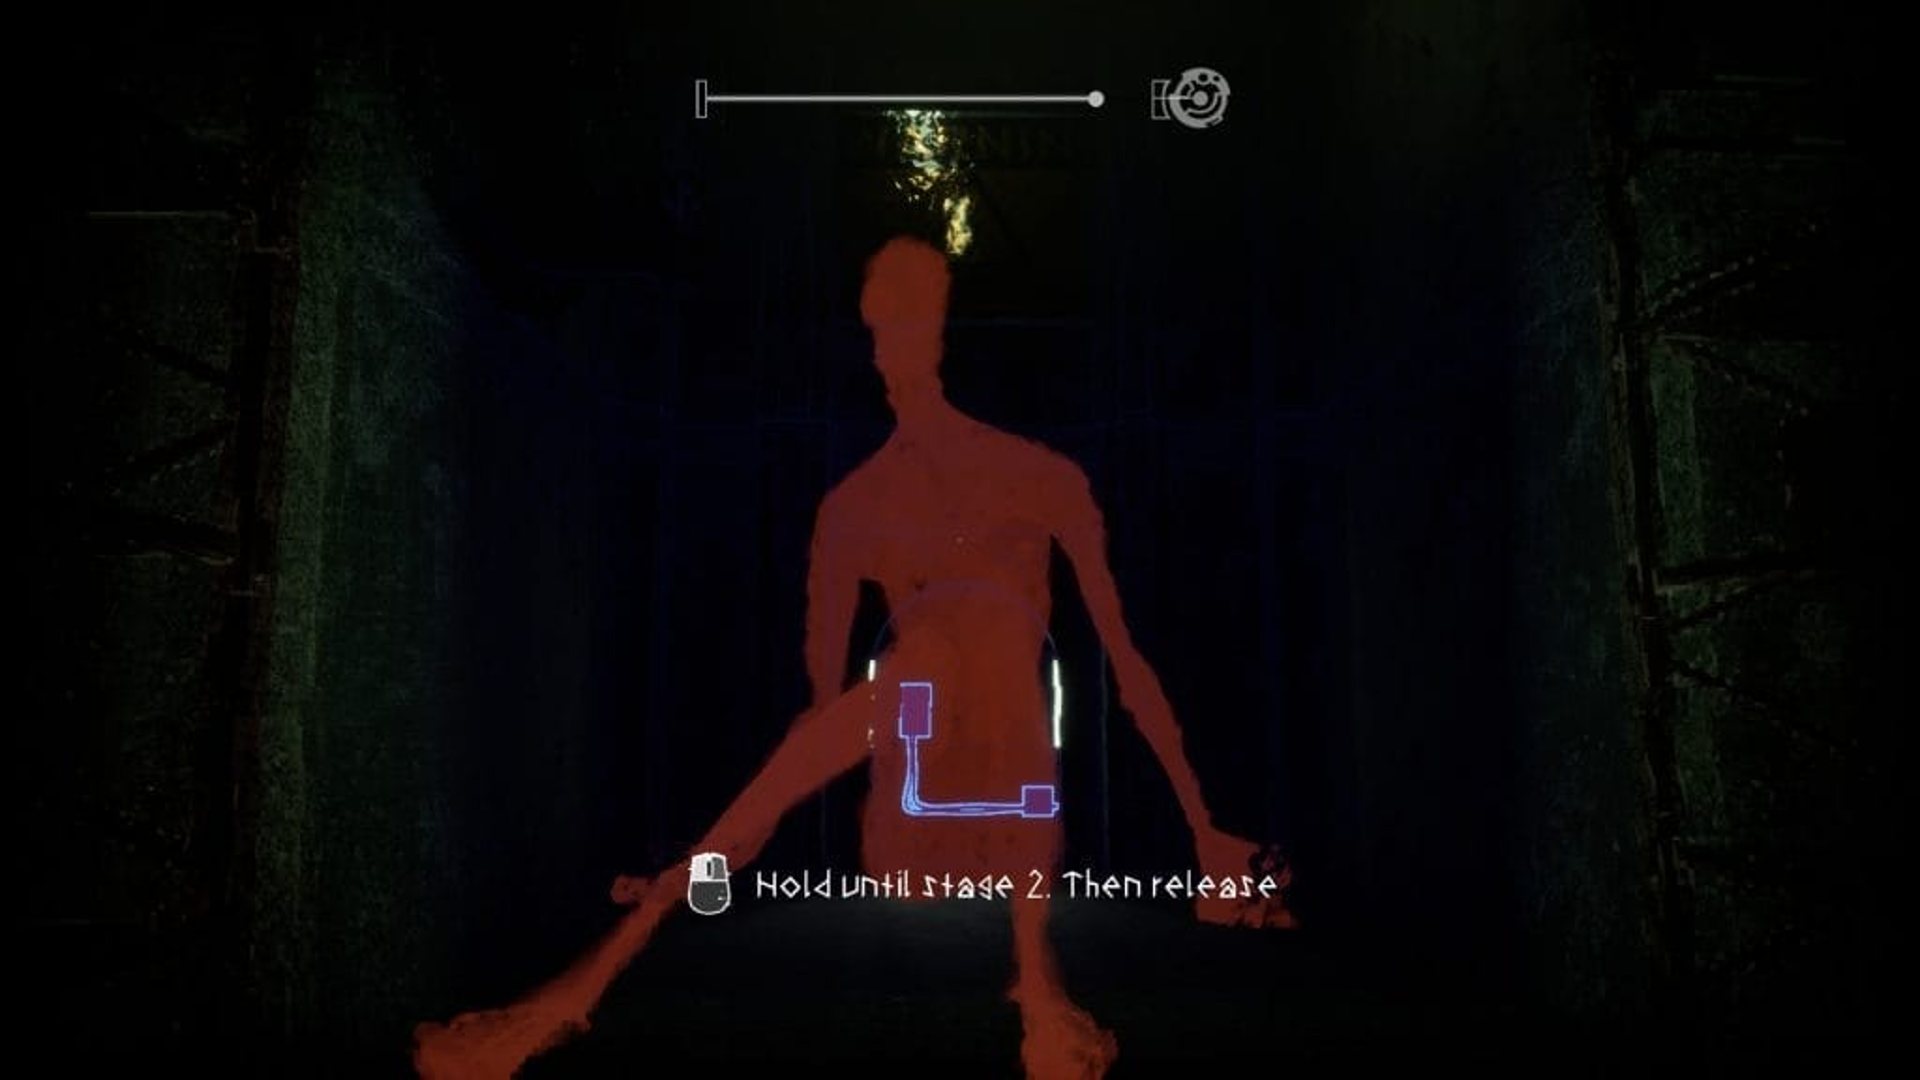 A creature can be seen in front of the player